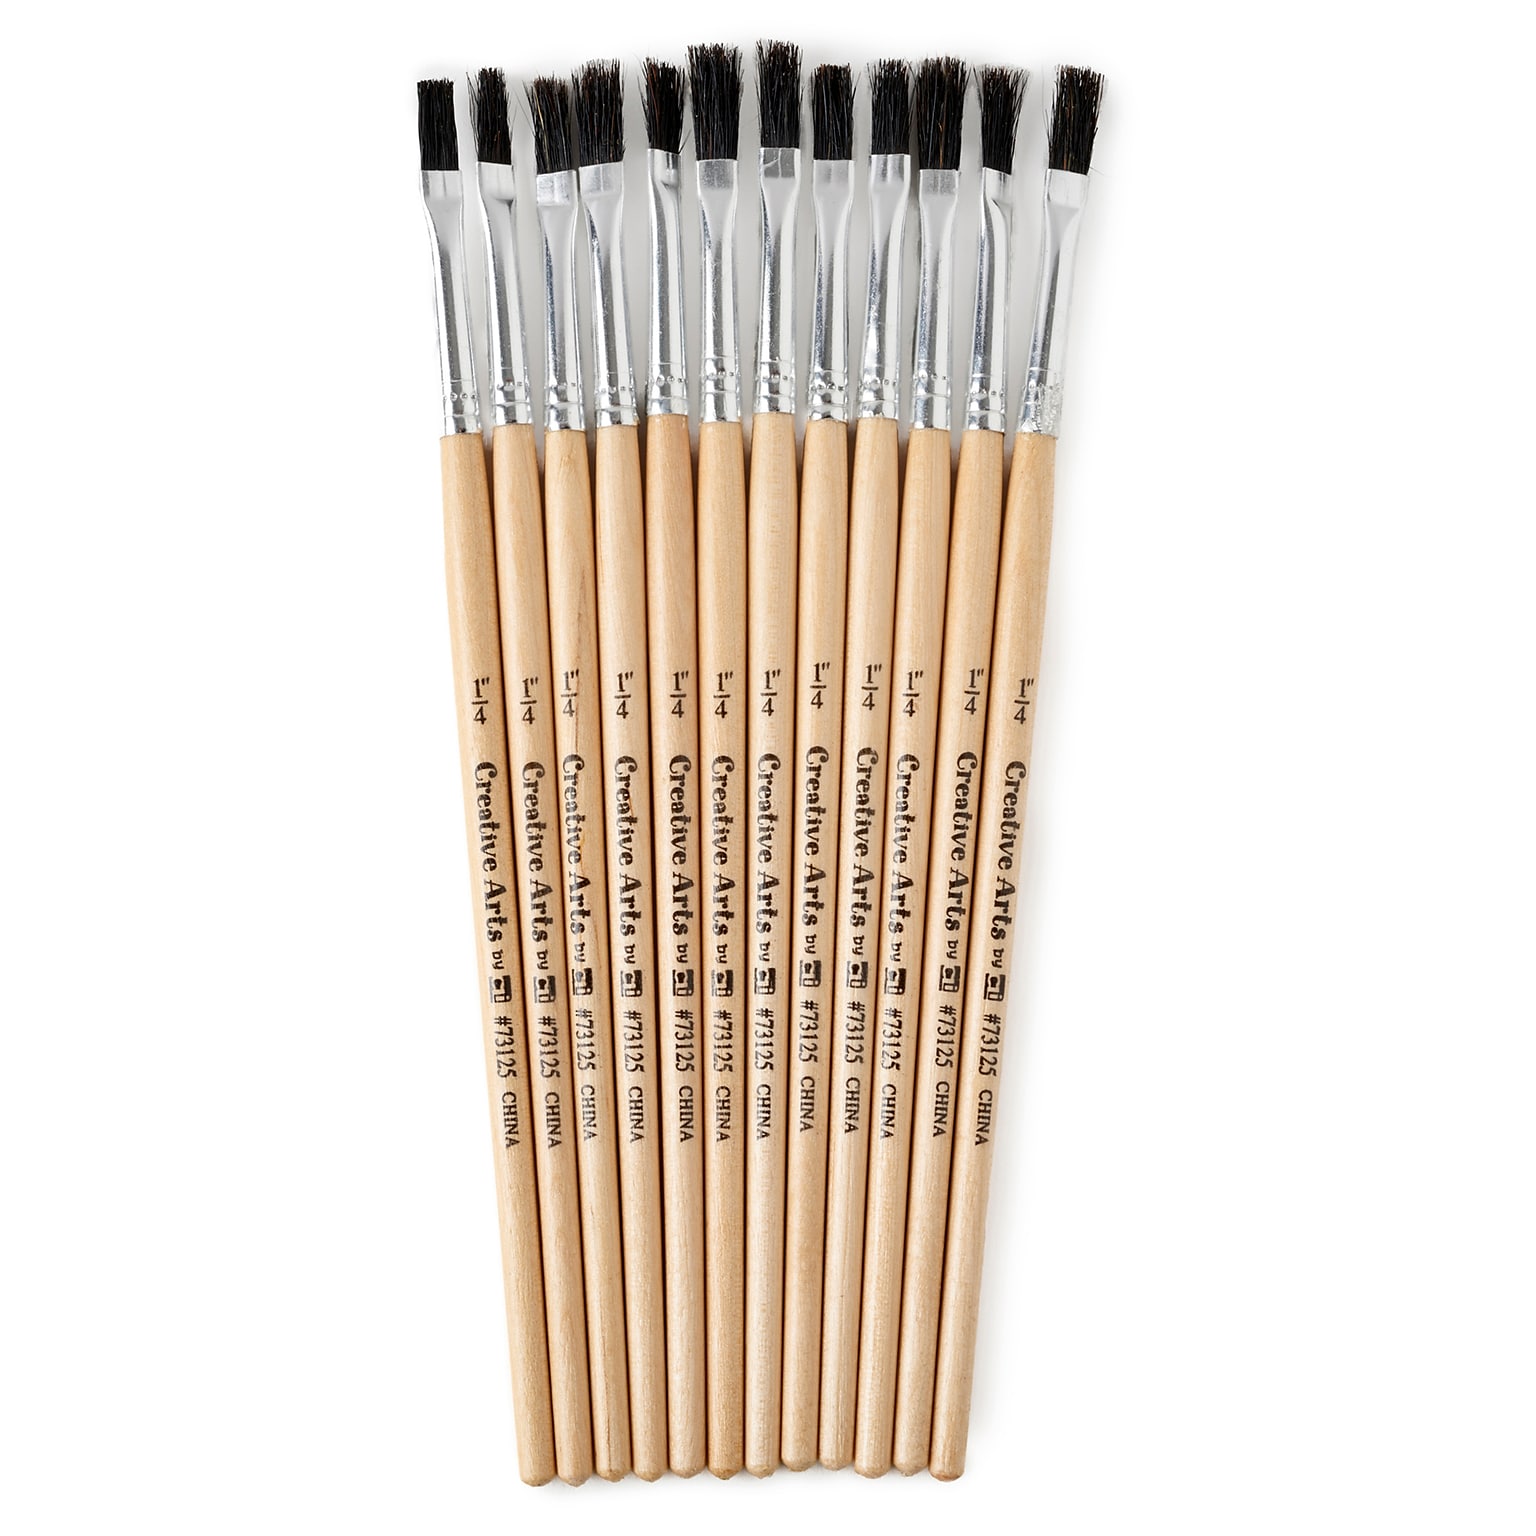 Charles Leonard Flat Easel Paint Brushes With 1/4 Wide Natural Stubby Handle, Black Bristle, 6/Bundle